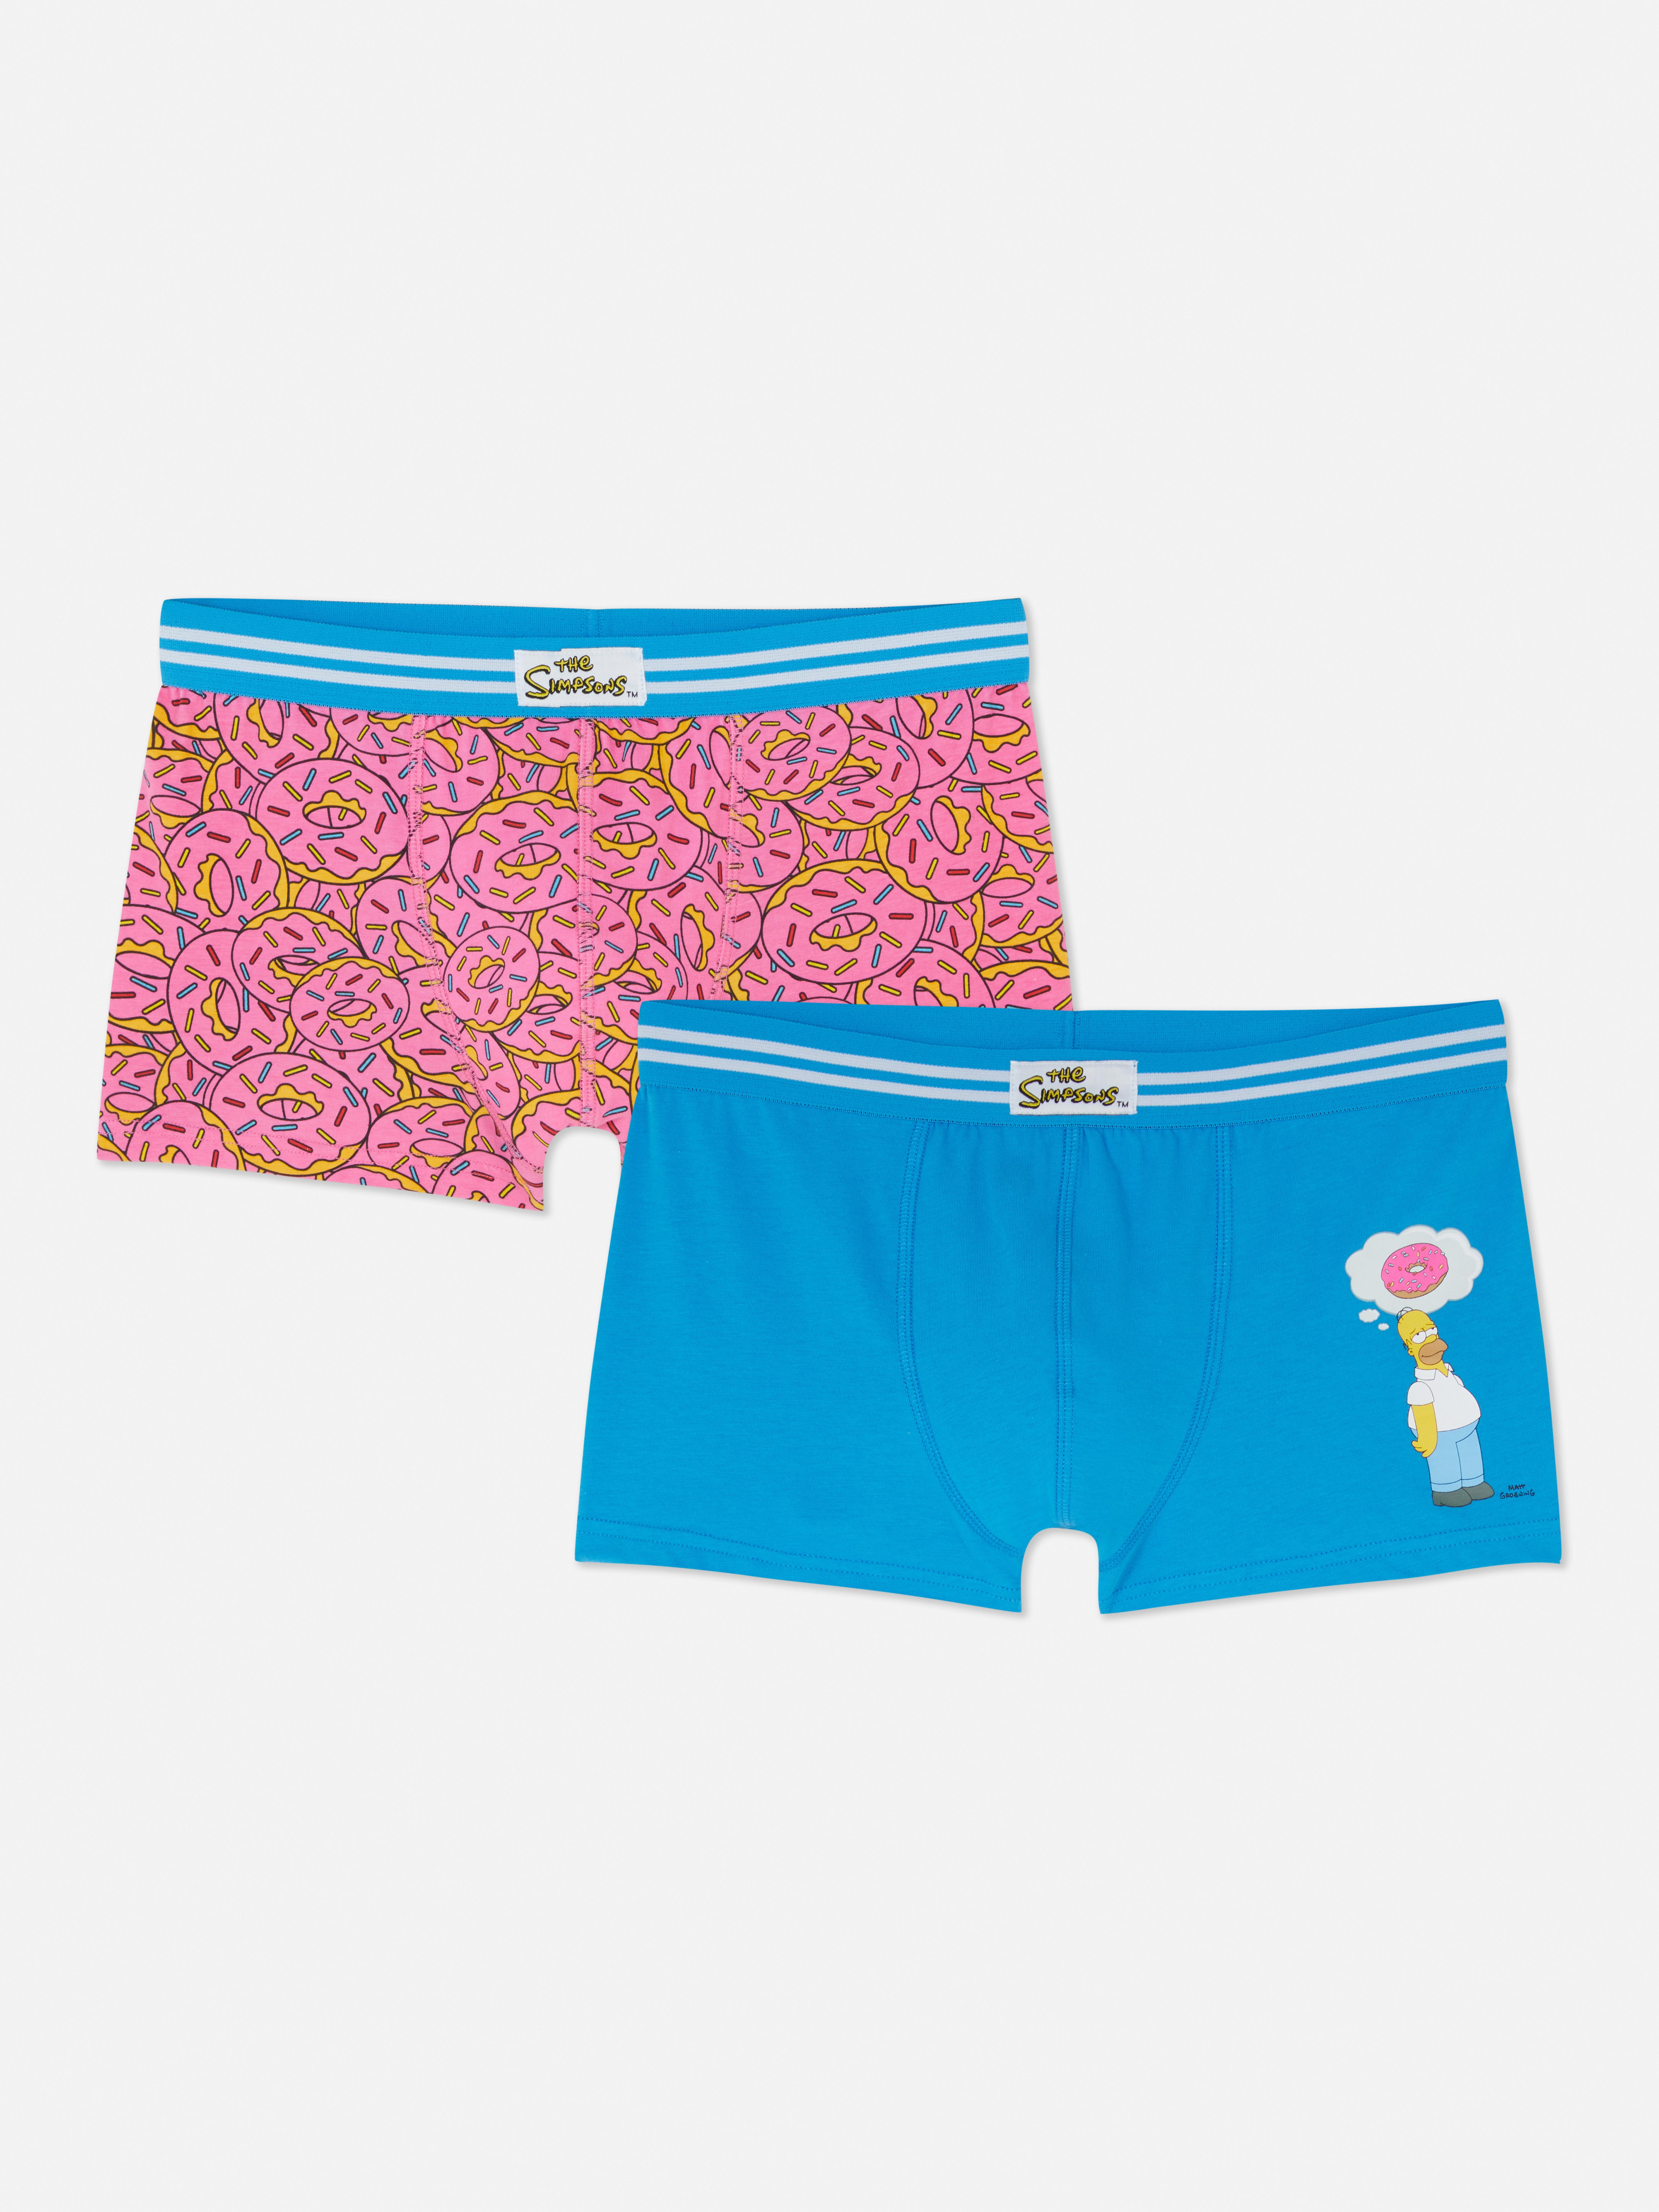 2-Pack The Simpsons Boxer Briefs